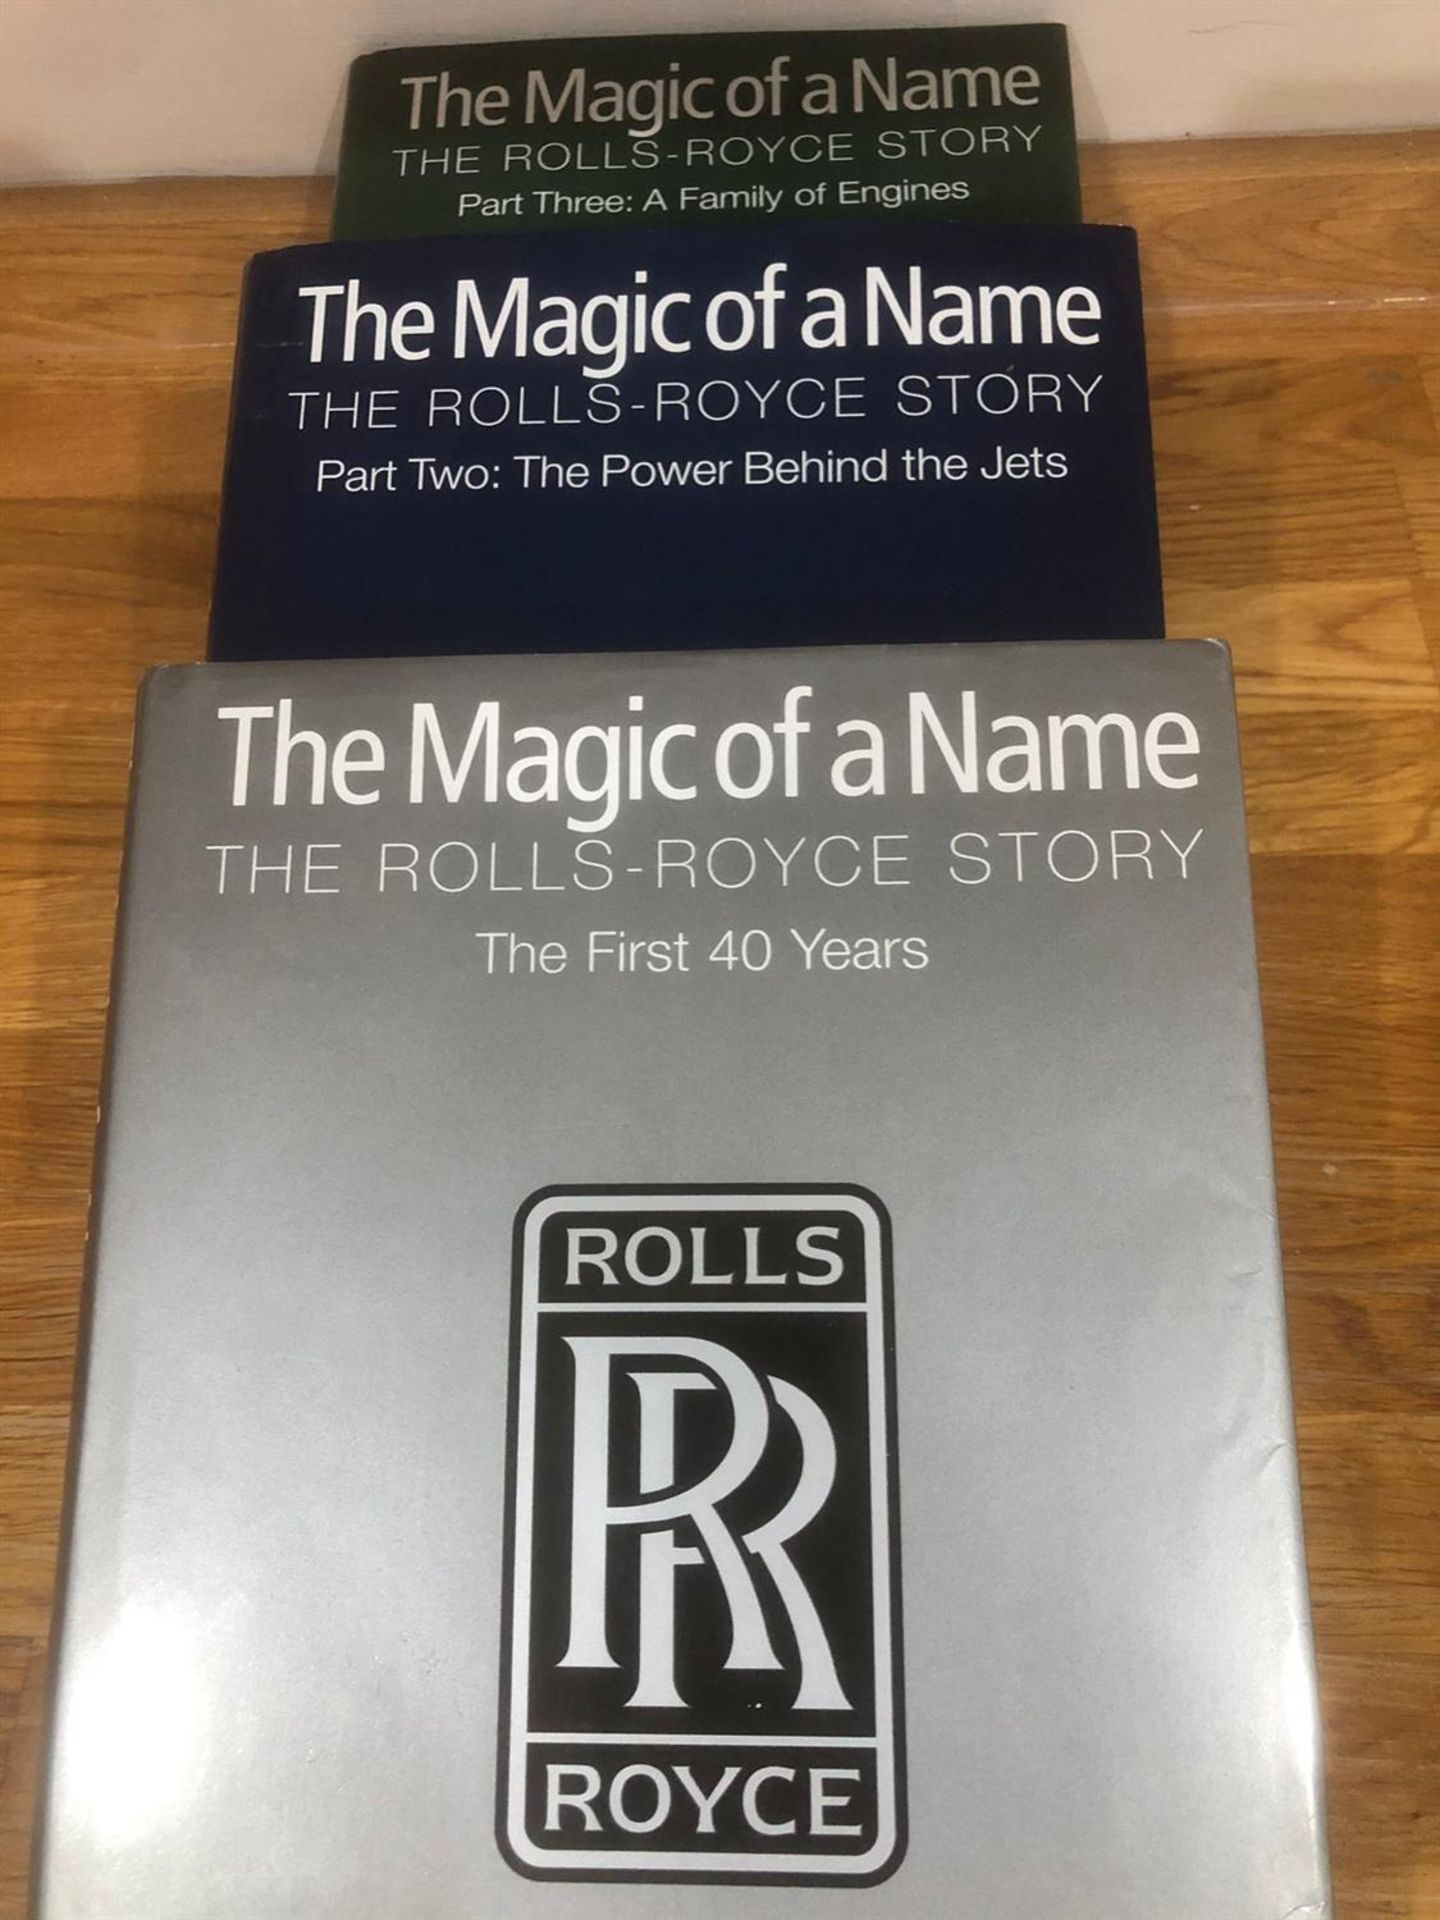 'The Magic of a Name' - The Rolls-Royce Story - Image 4 of 4